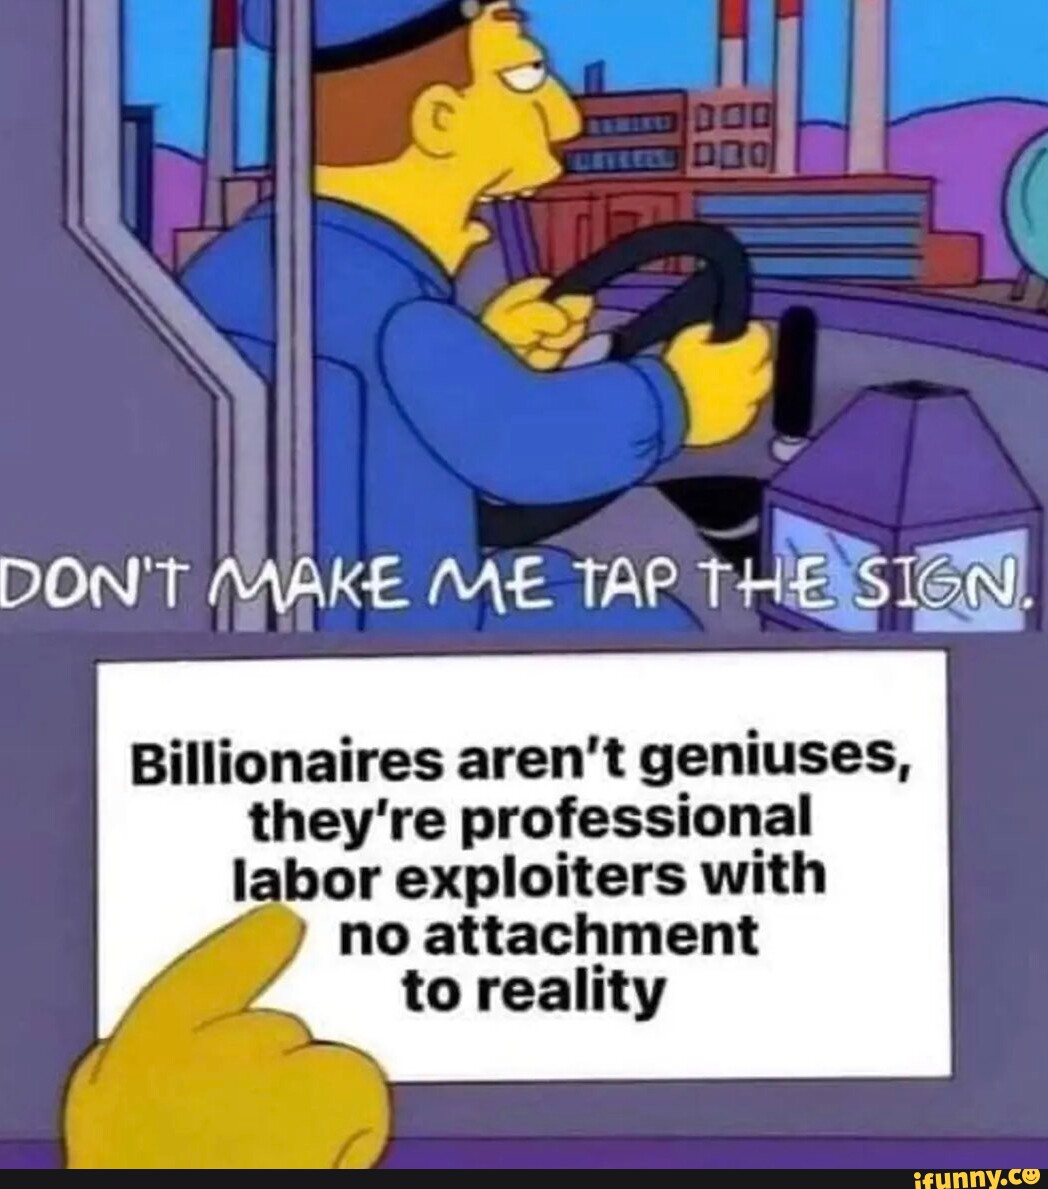 don-t-make-me-tap-sign-billionaires-aren-t-geniuses-they-re-professional-labor-exploiters-with